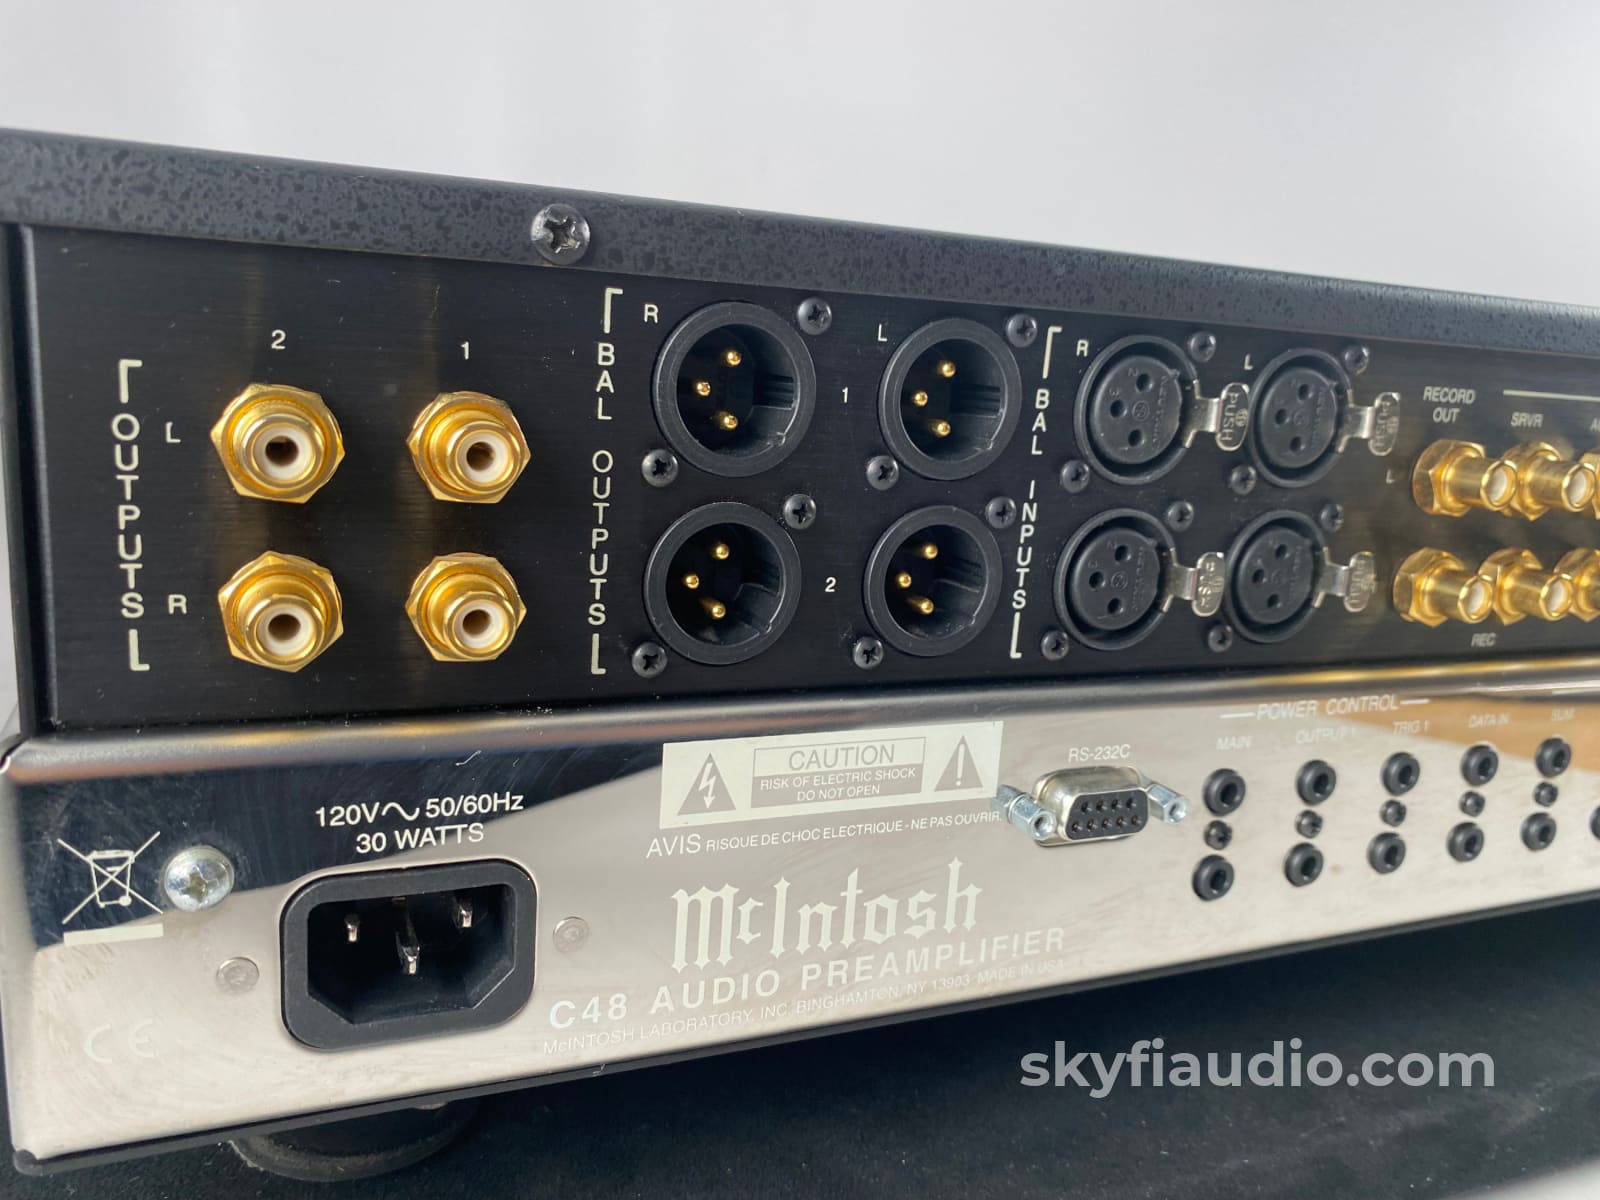 Mcintosh C48 Preamplifier With Built In Dac